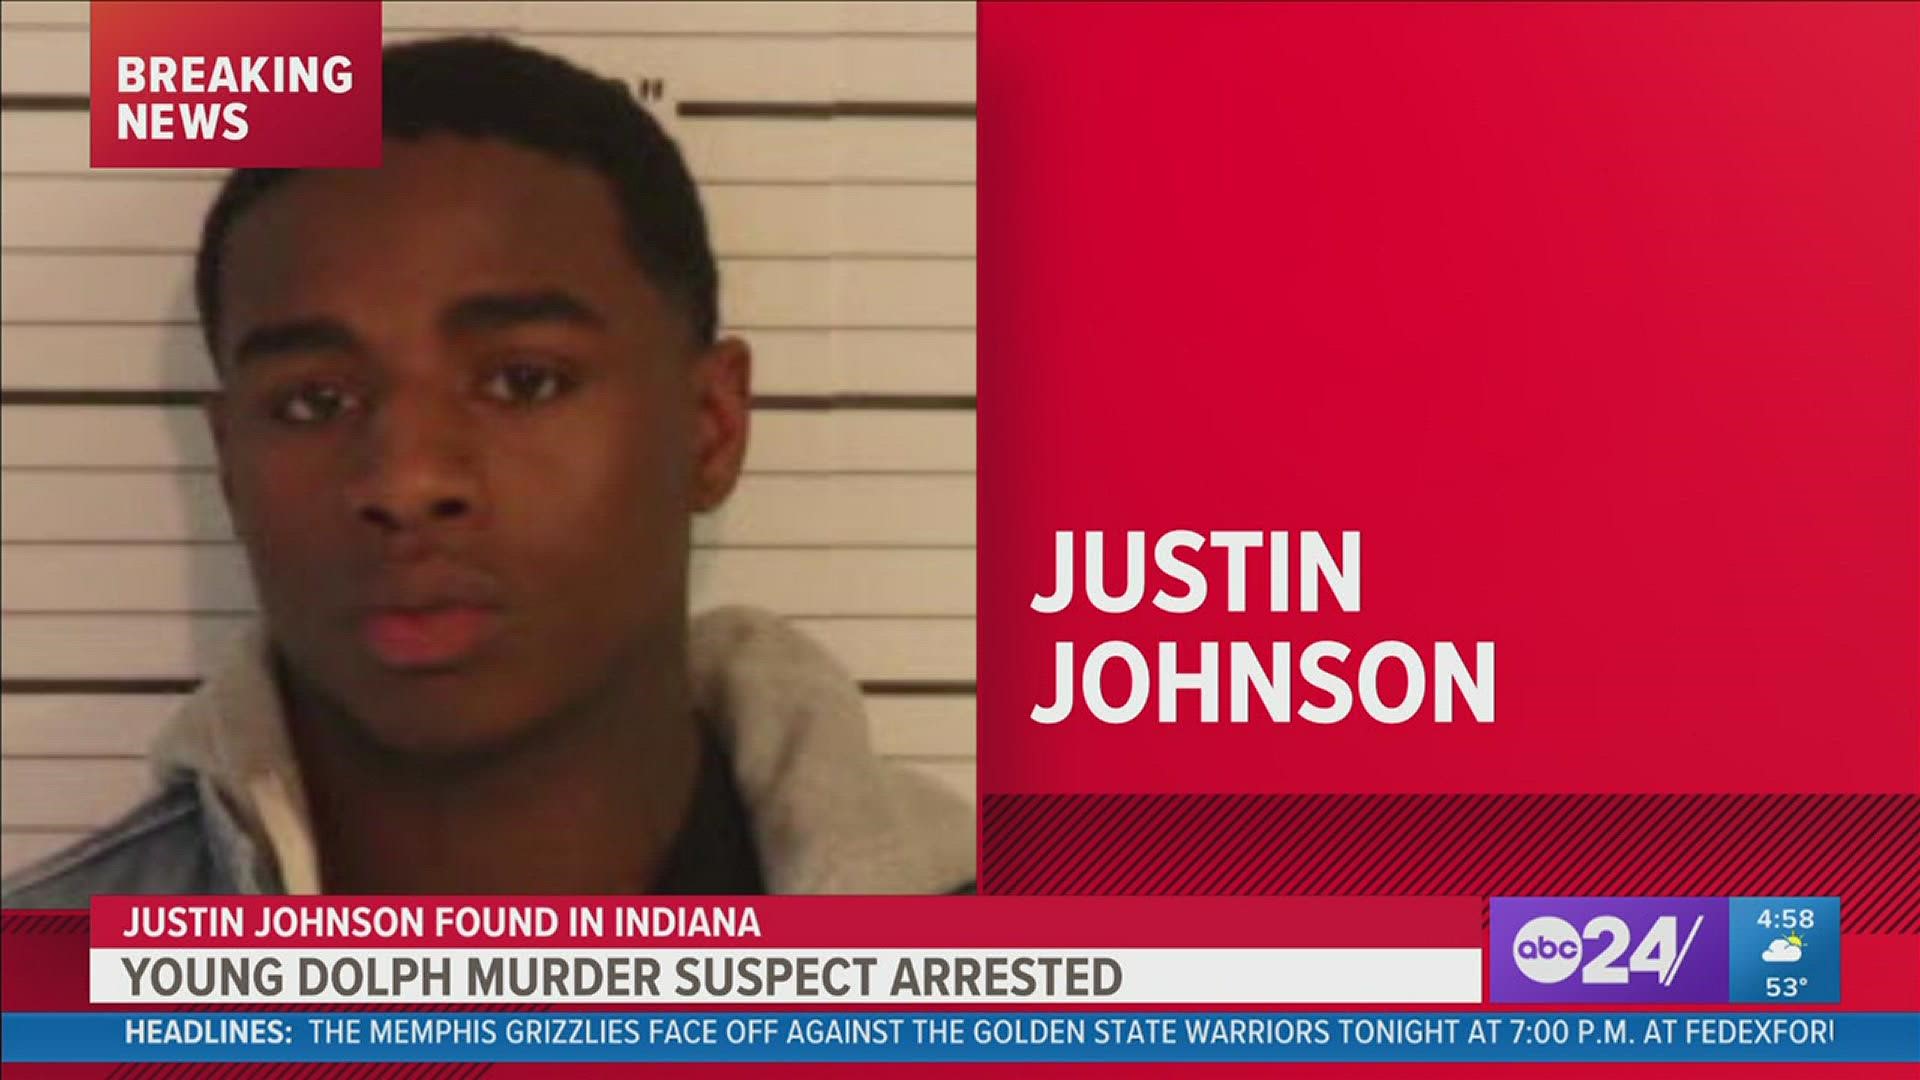 U.S. Marshals announced Johnson, wanted in the Memphis rapper's killing, was captured about 3:00 p.m. CT on Tuesday, January 11, 2022, in Indiana.